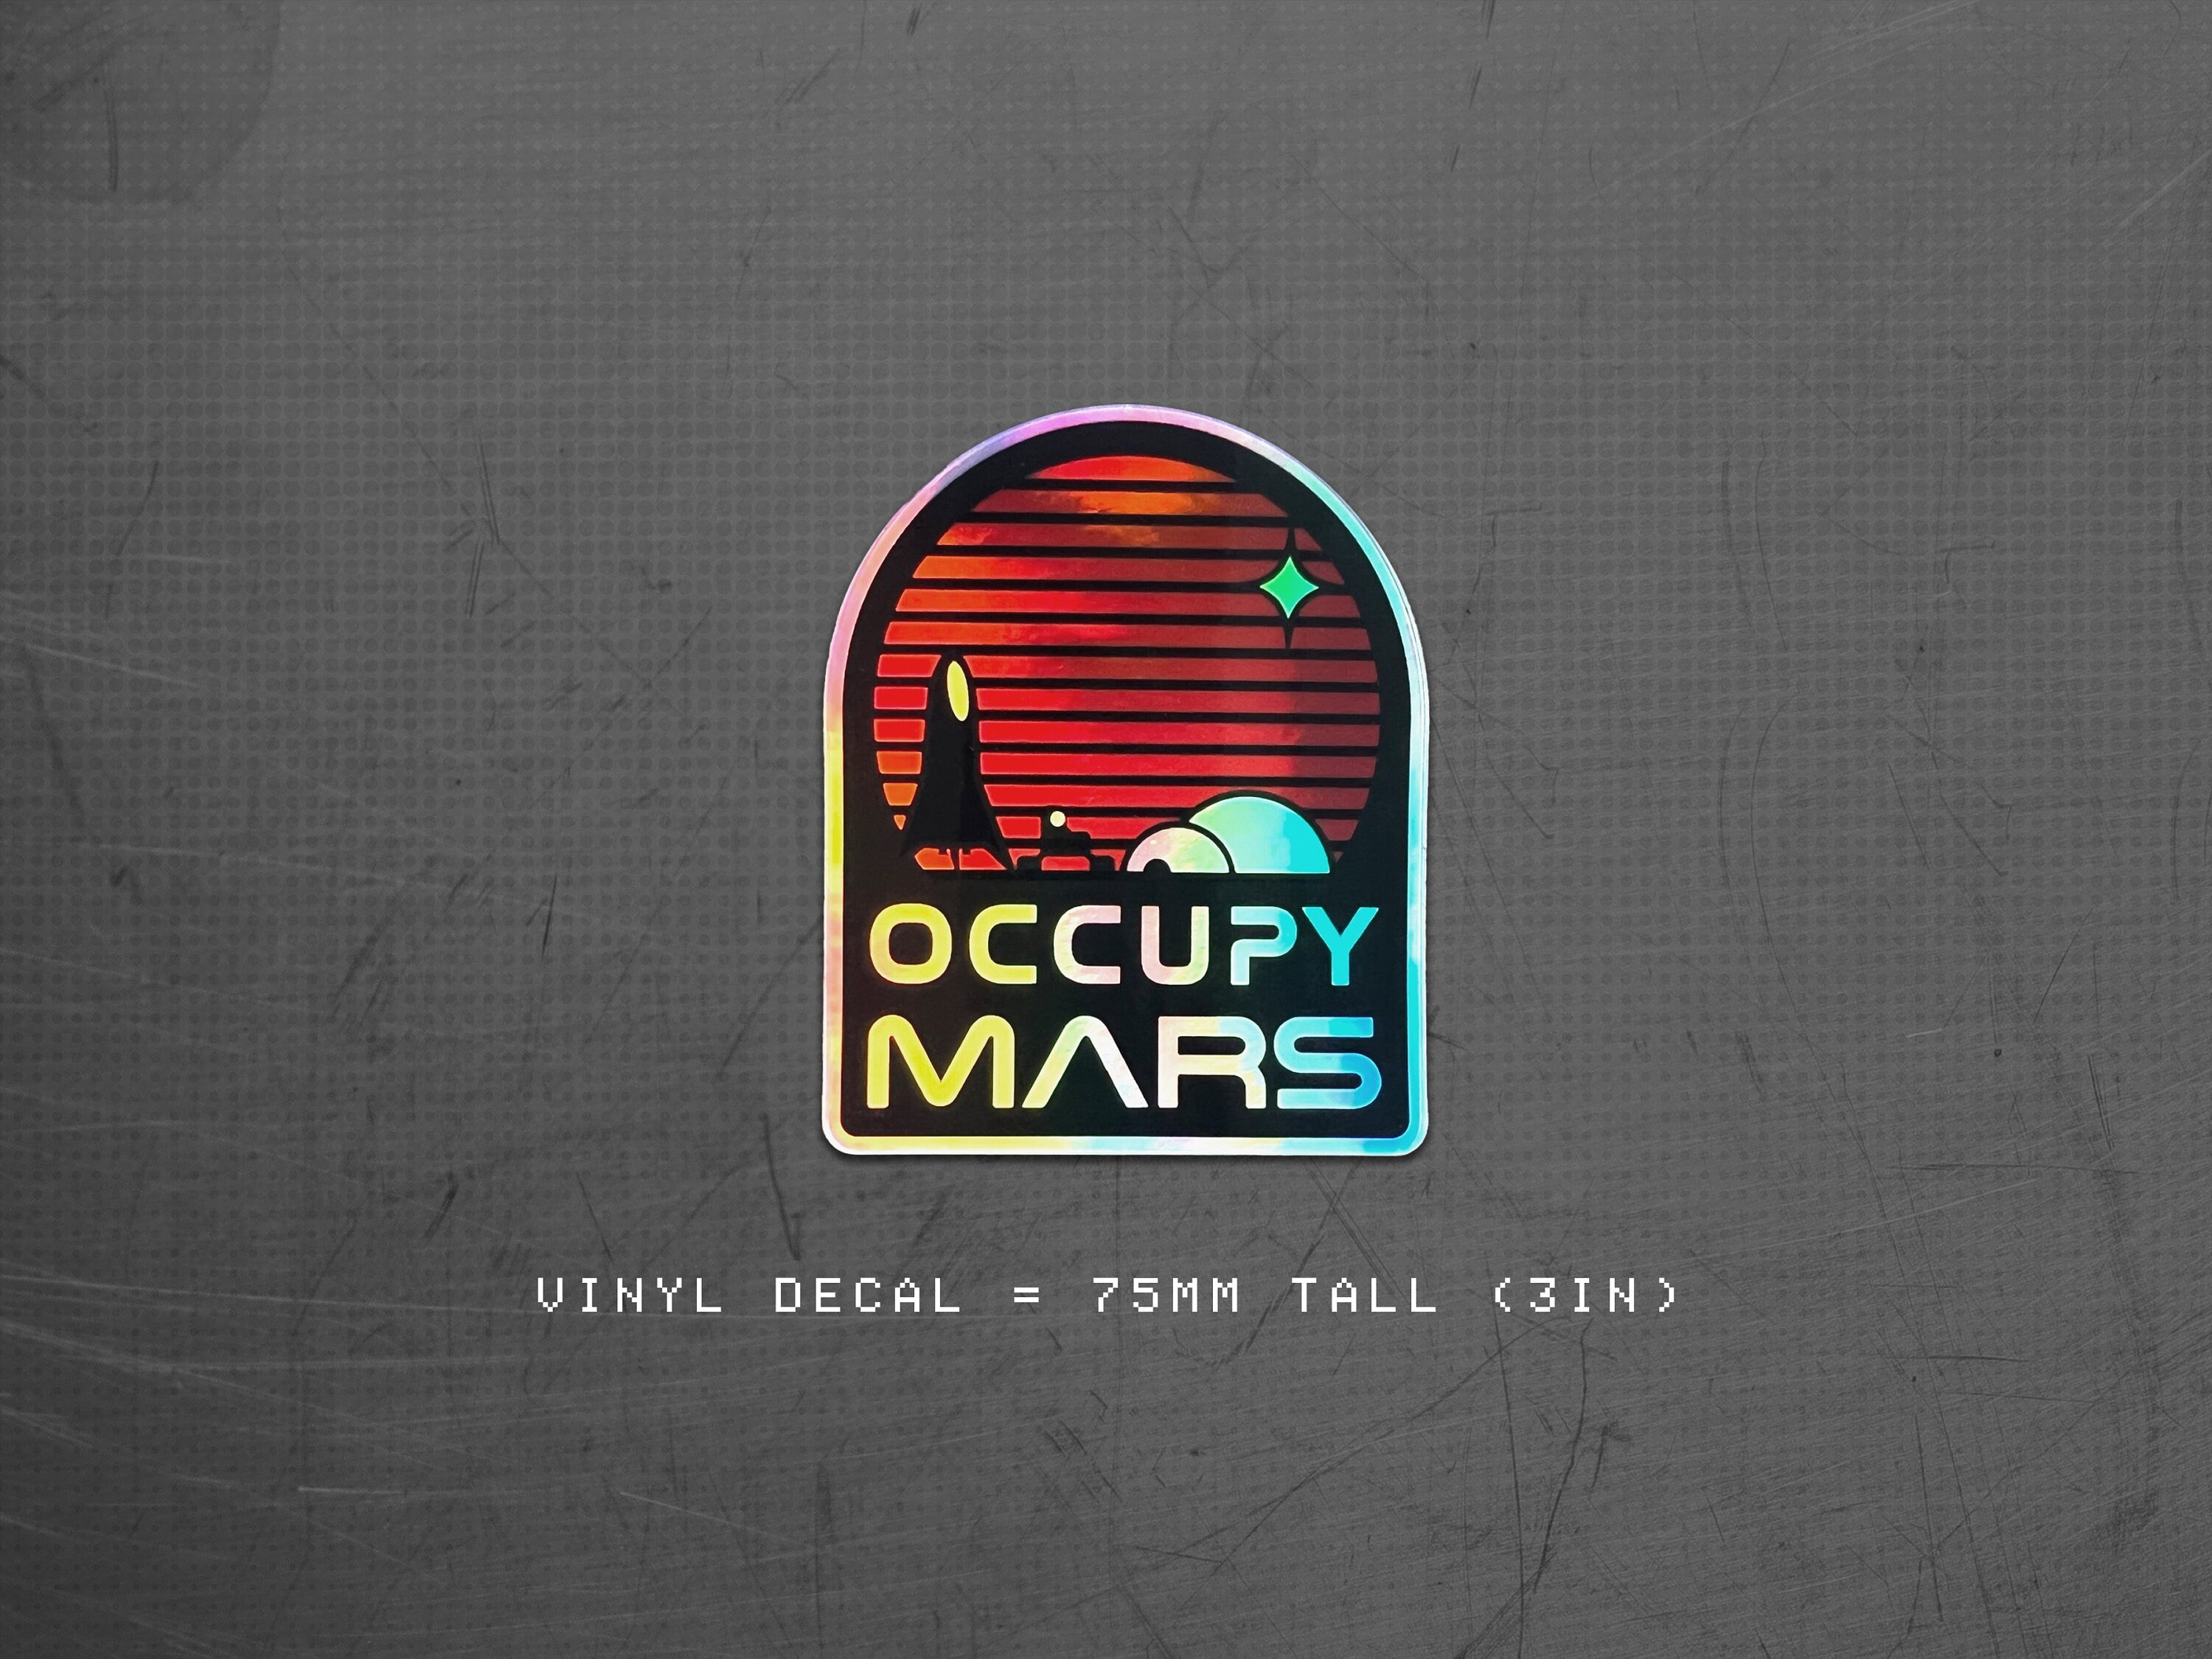 Occupy Mars Cyberpunk Holographic Vinyl Decal - Laptop / Waterbottle Sci-Fi Sticker - Martian Base Aerospace Gift by The Sciencey